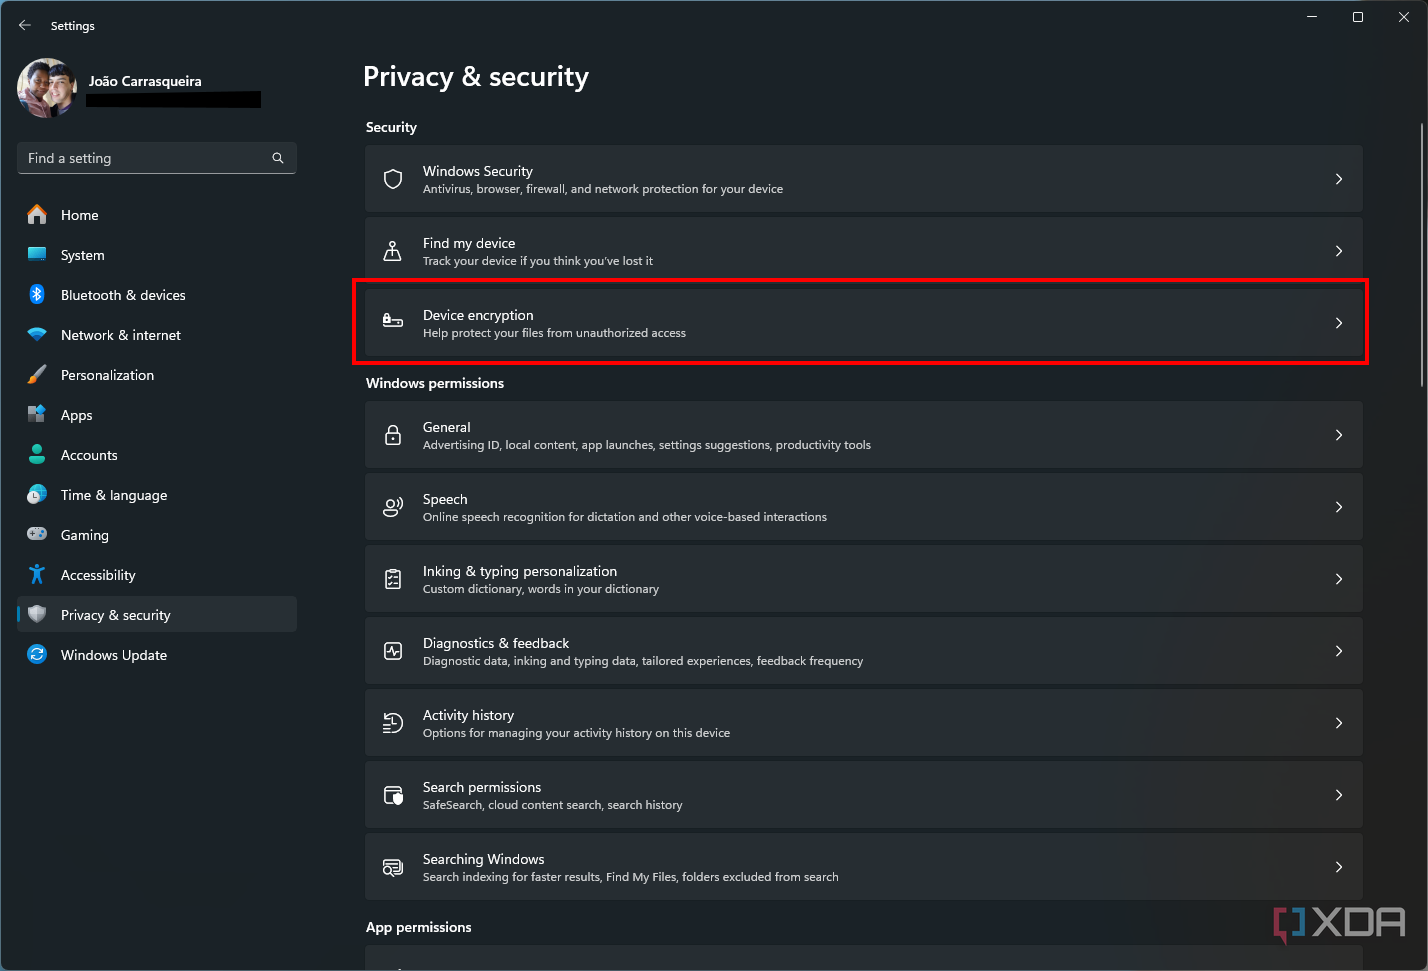 Screenshot of the Privacy & Security section in the Windows 11 Settings app